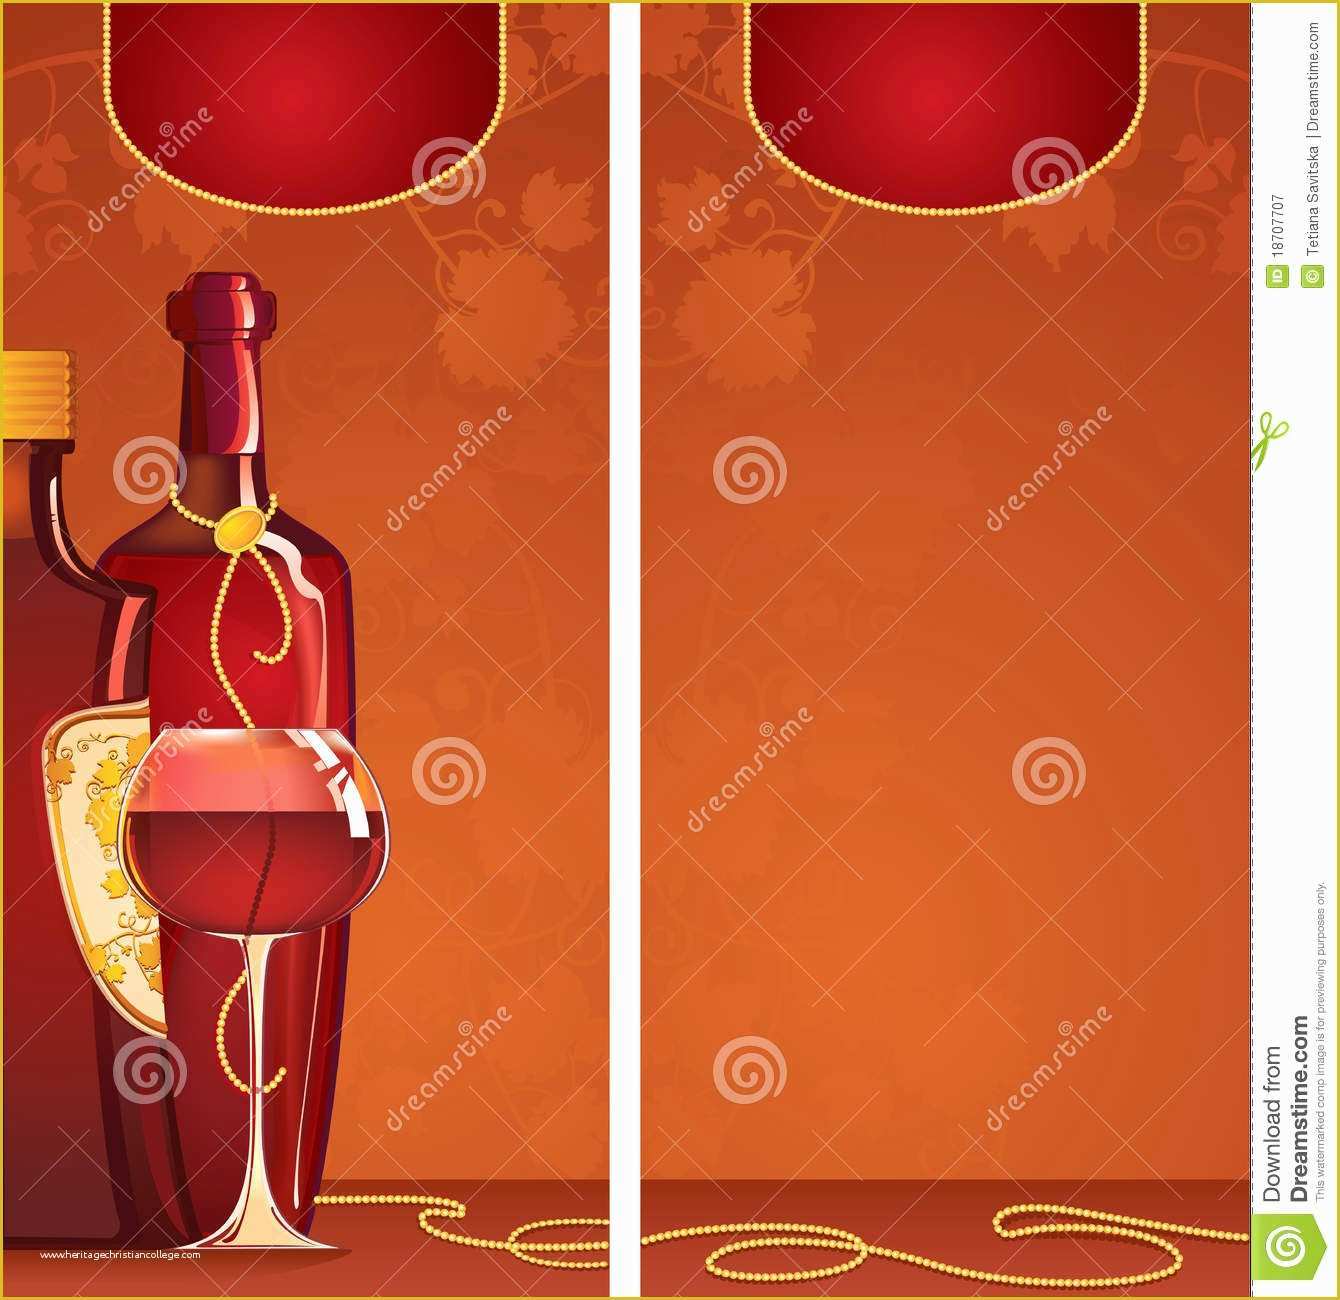 Free Wine Website Templates Download Of Template Of Wine List Stock Illustration Image Of Alcohol